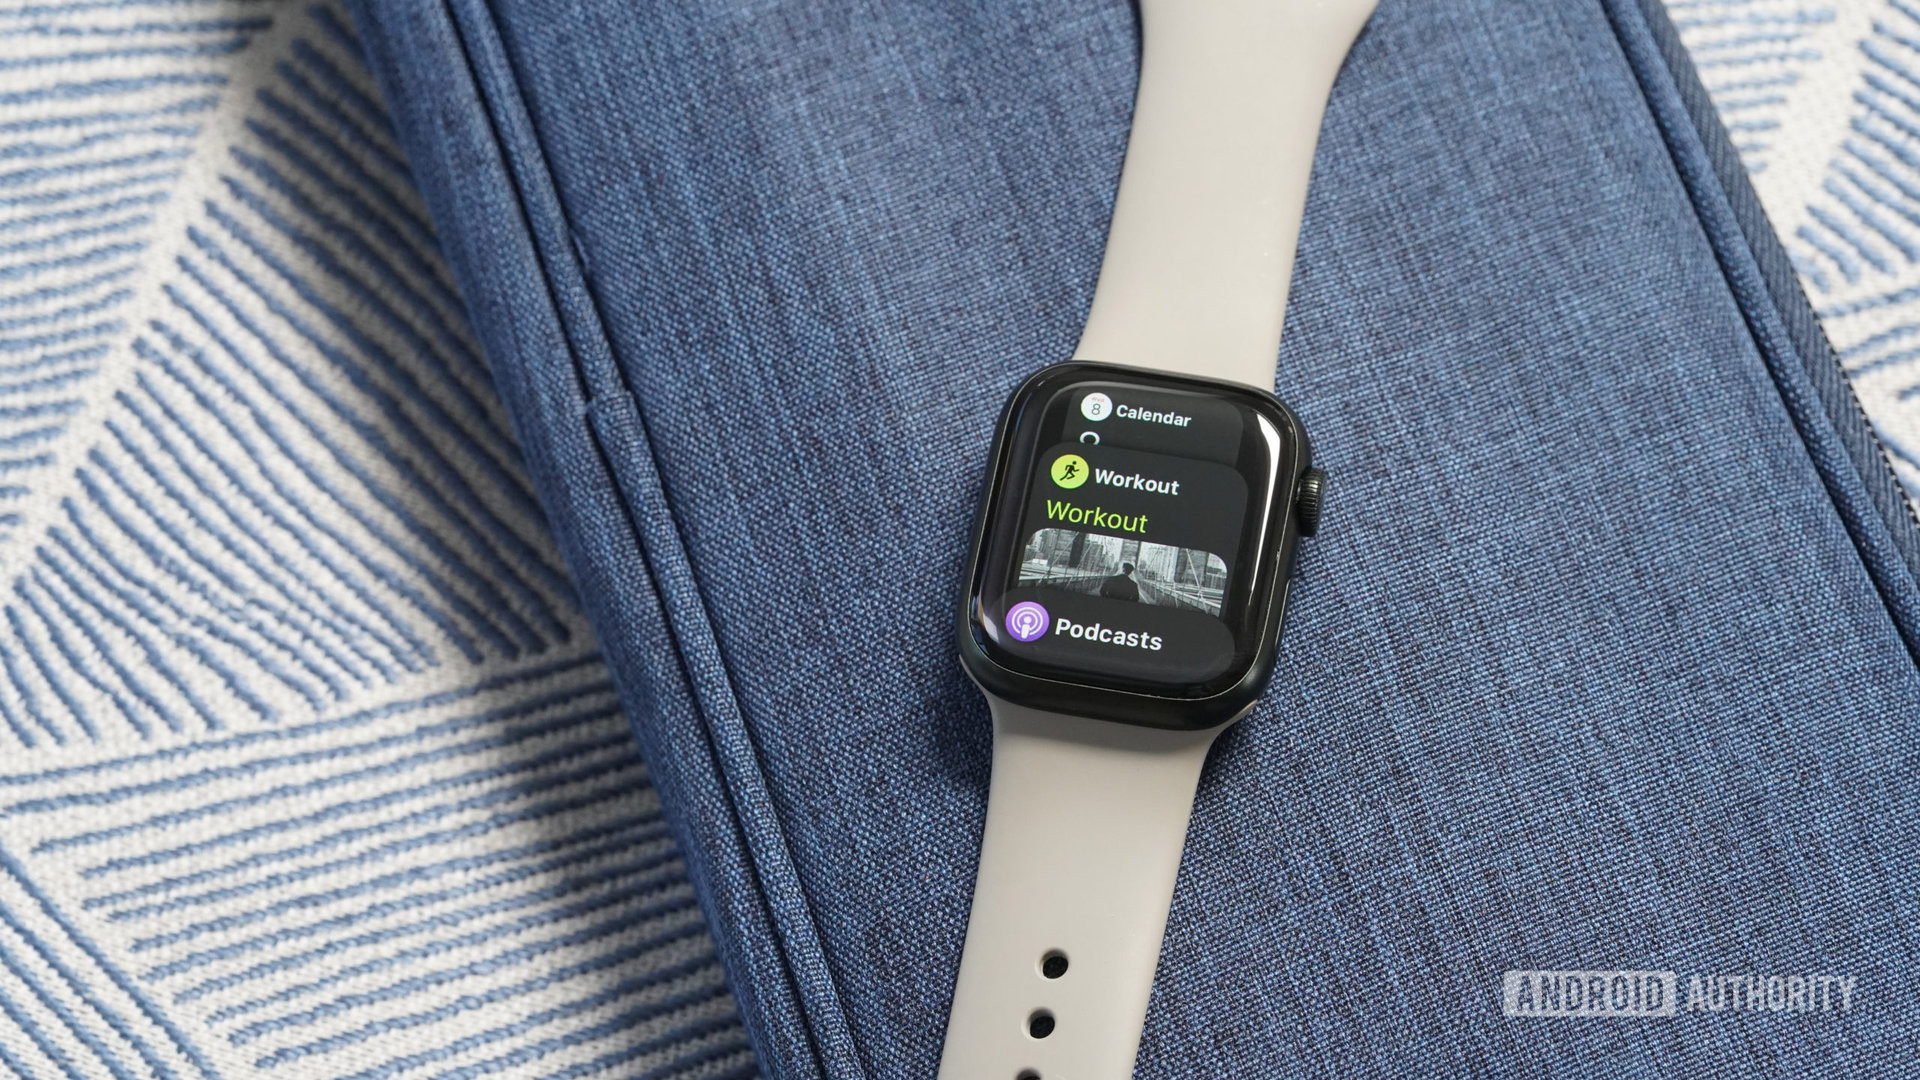 The watchOS 9 software includes a refreshed Dock as well as upgrades to other native apps including the Calendar, Podcast, and Workout apps.